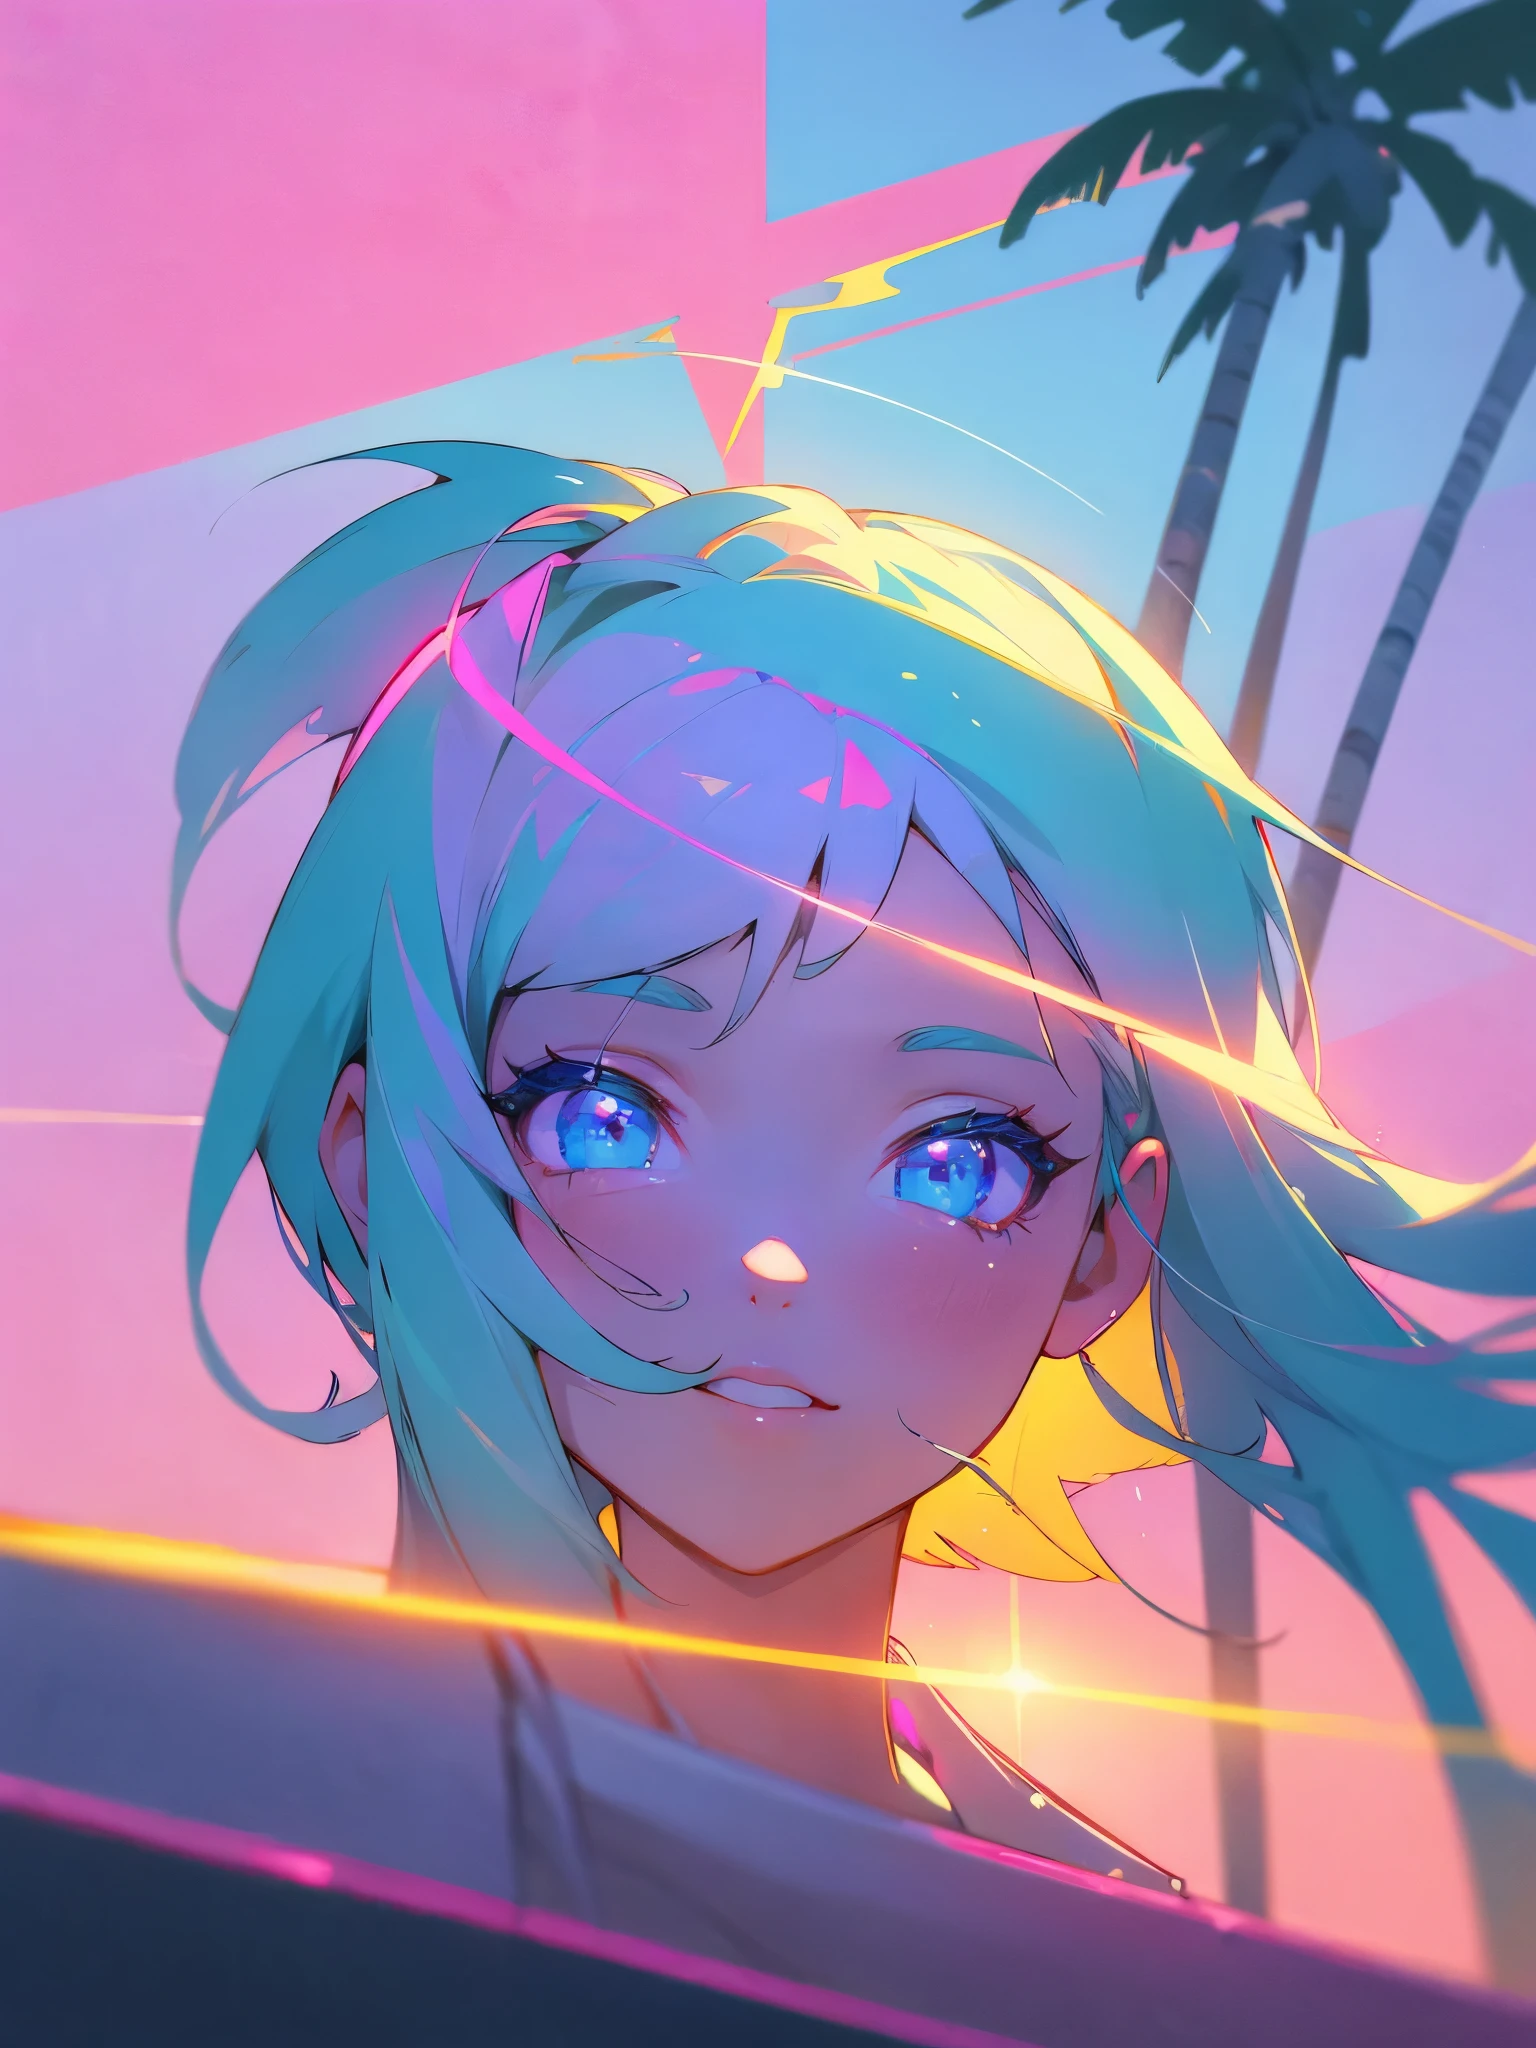 best quality,highres,vivid colors,ultra-detailed,portrait style,vaporwave aesthetic,neon lights,80s vibes,synthesizer sound,retro technology,futuristic cityscape,palm trees,sunset beach,glitch effect,digital art,floating geometric shapes